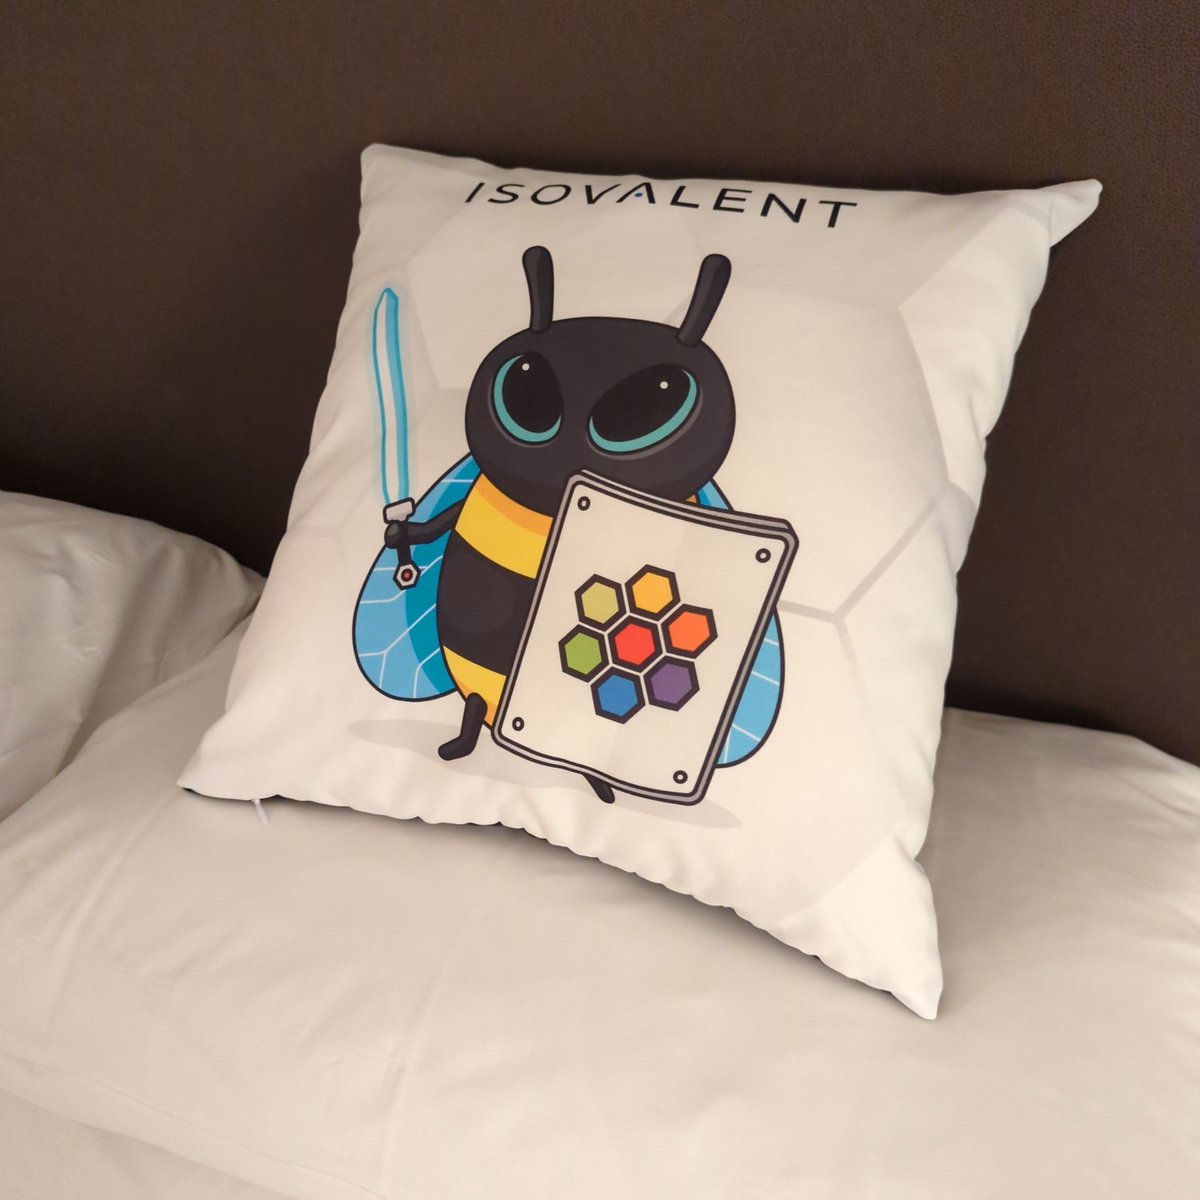 And thanks to @tgraf__ for getting me this @isovalent pillow to sleep comfortably and securely.